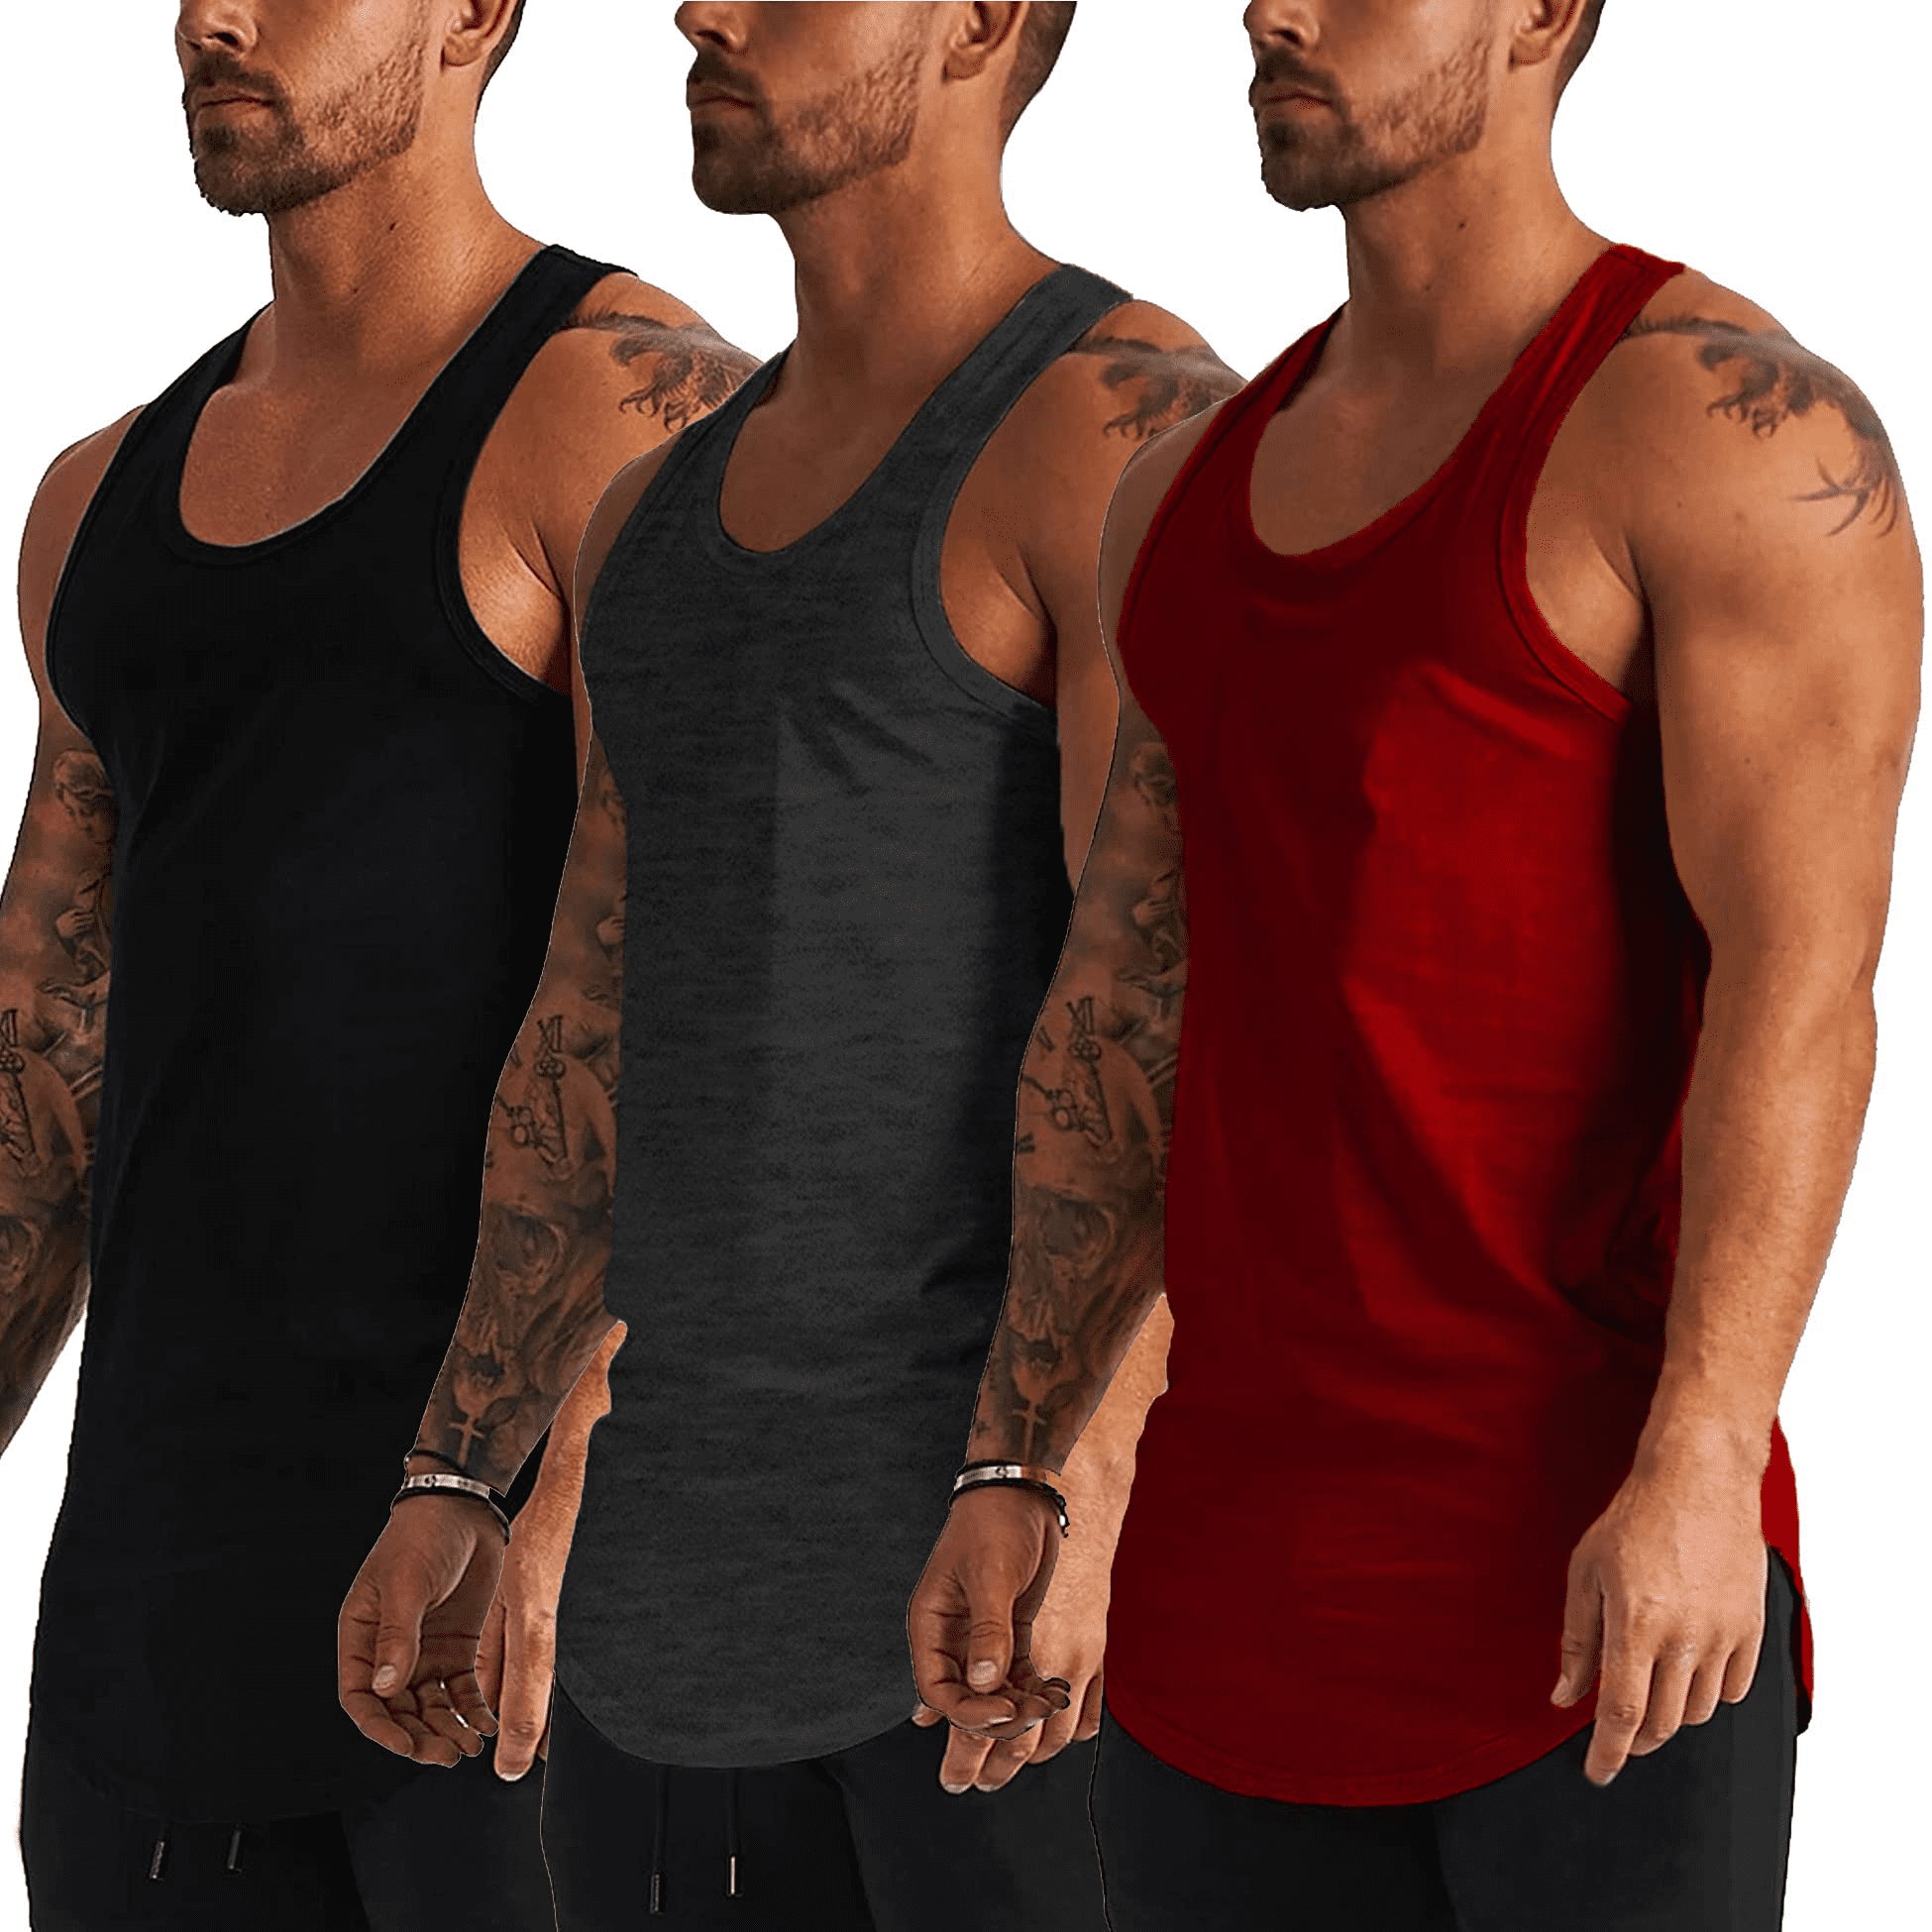 COOFANDY Men's 3 Pack Workout Tank Top Gym Muscle Tee Fitness Bodybuilding Sleeveless T Shirts